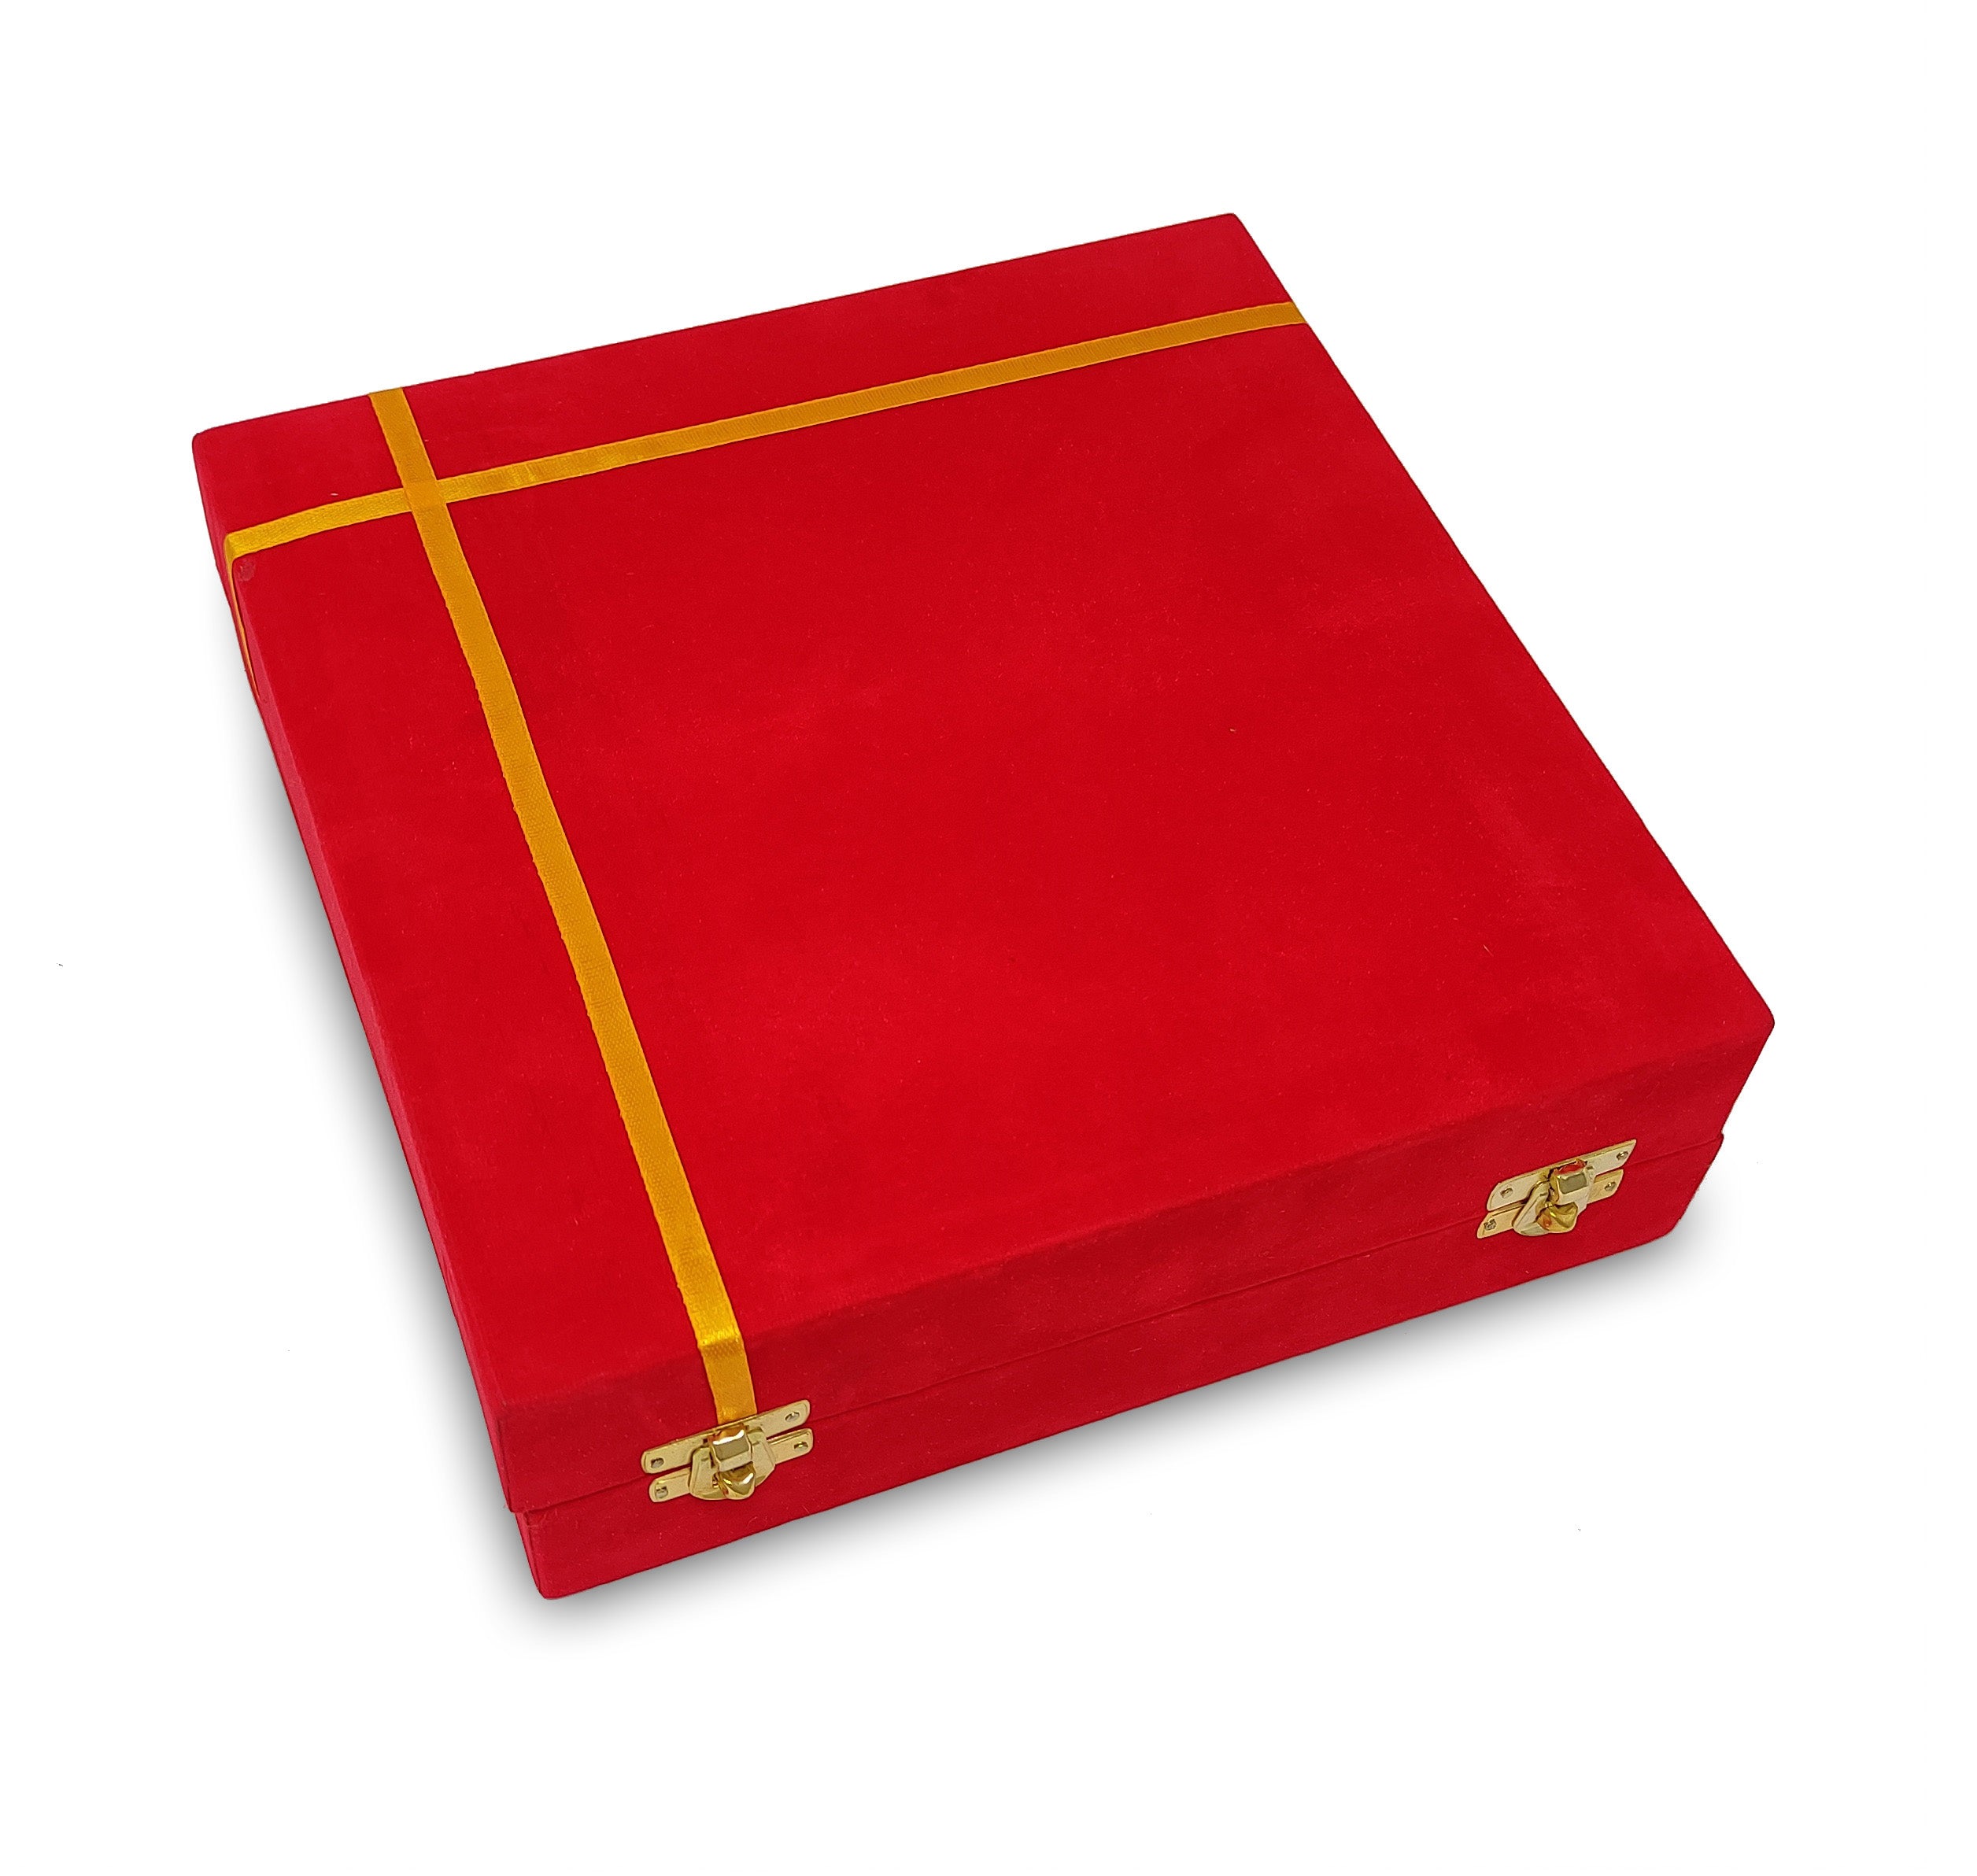 BENGALEN Pooja Thali Set Gold & Silver Plated with Red Gift Box